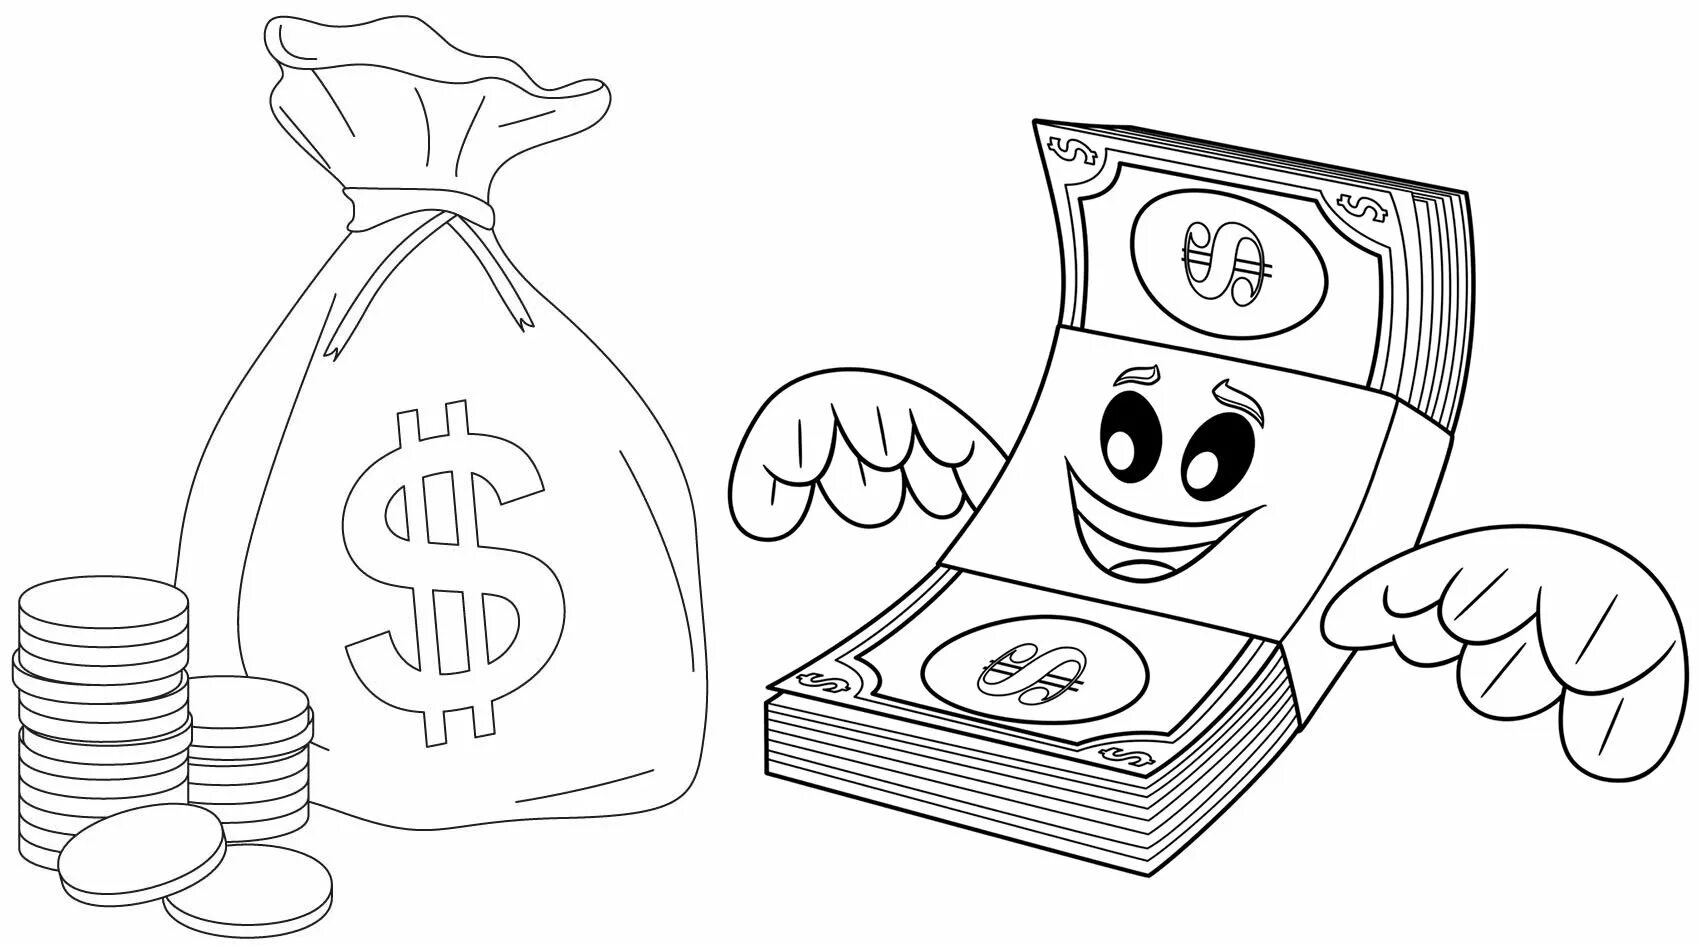 Real money rubles coloring pages for kids